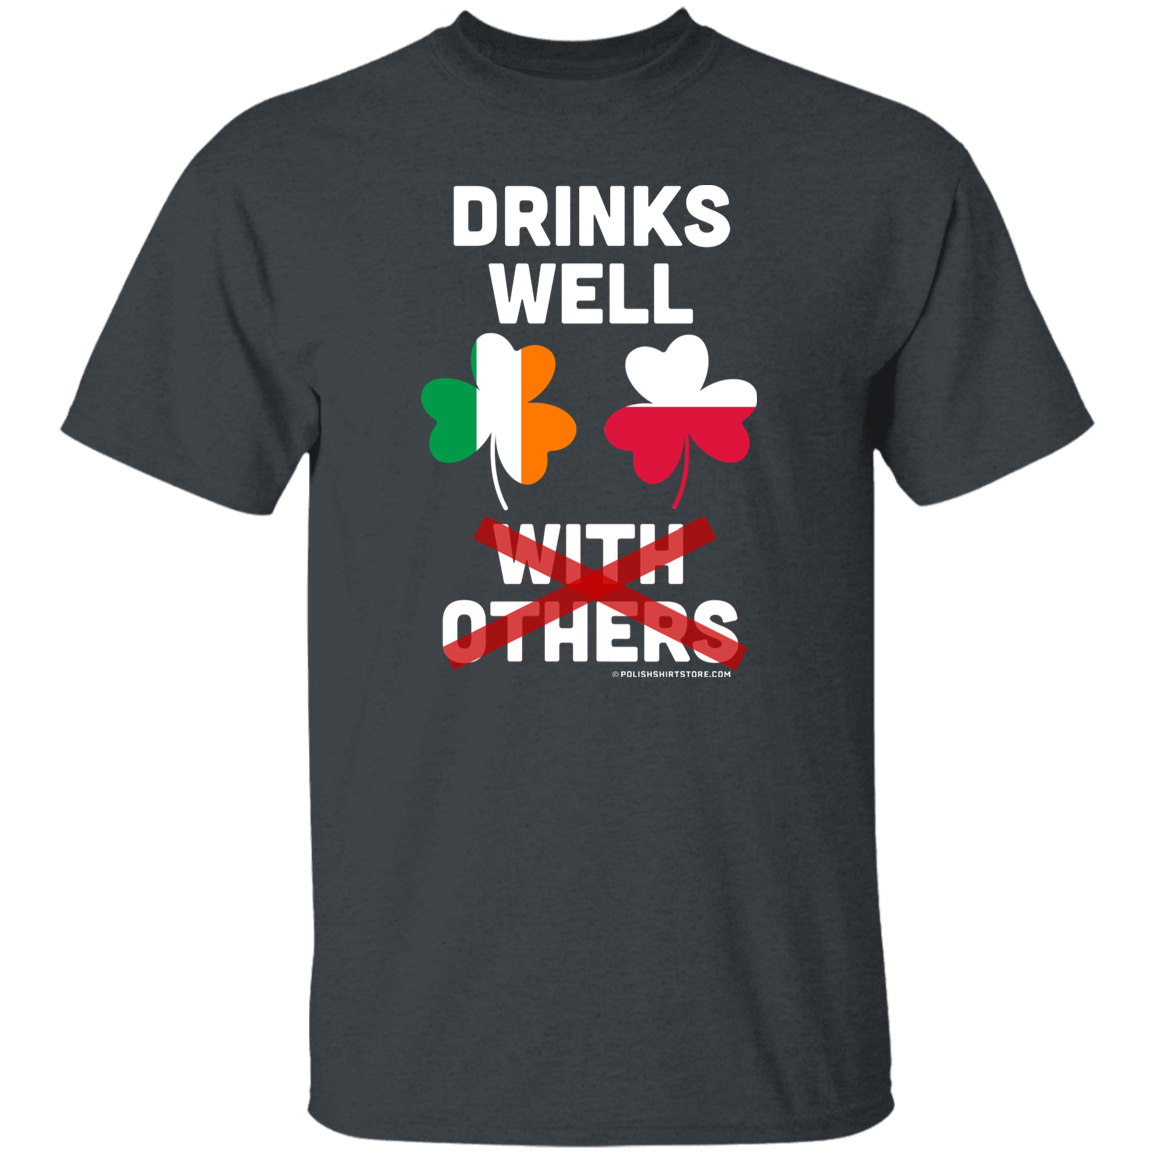 Drinks Well Not With Others Apparel CustomCat G500 5.3 oz. T-Shirt Dark Heather S